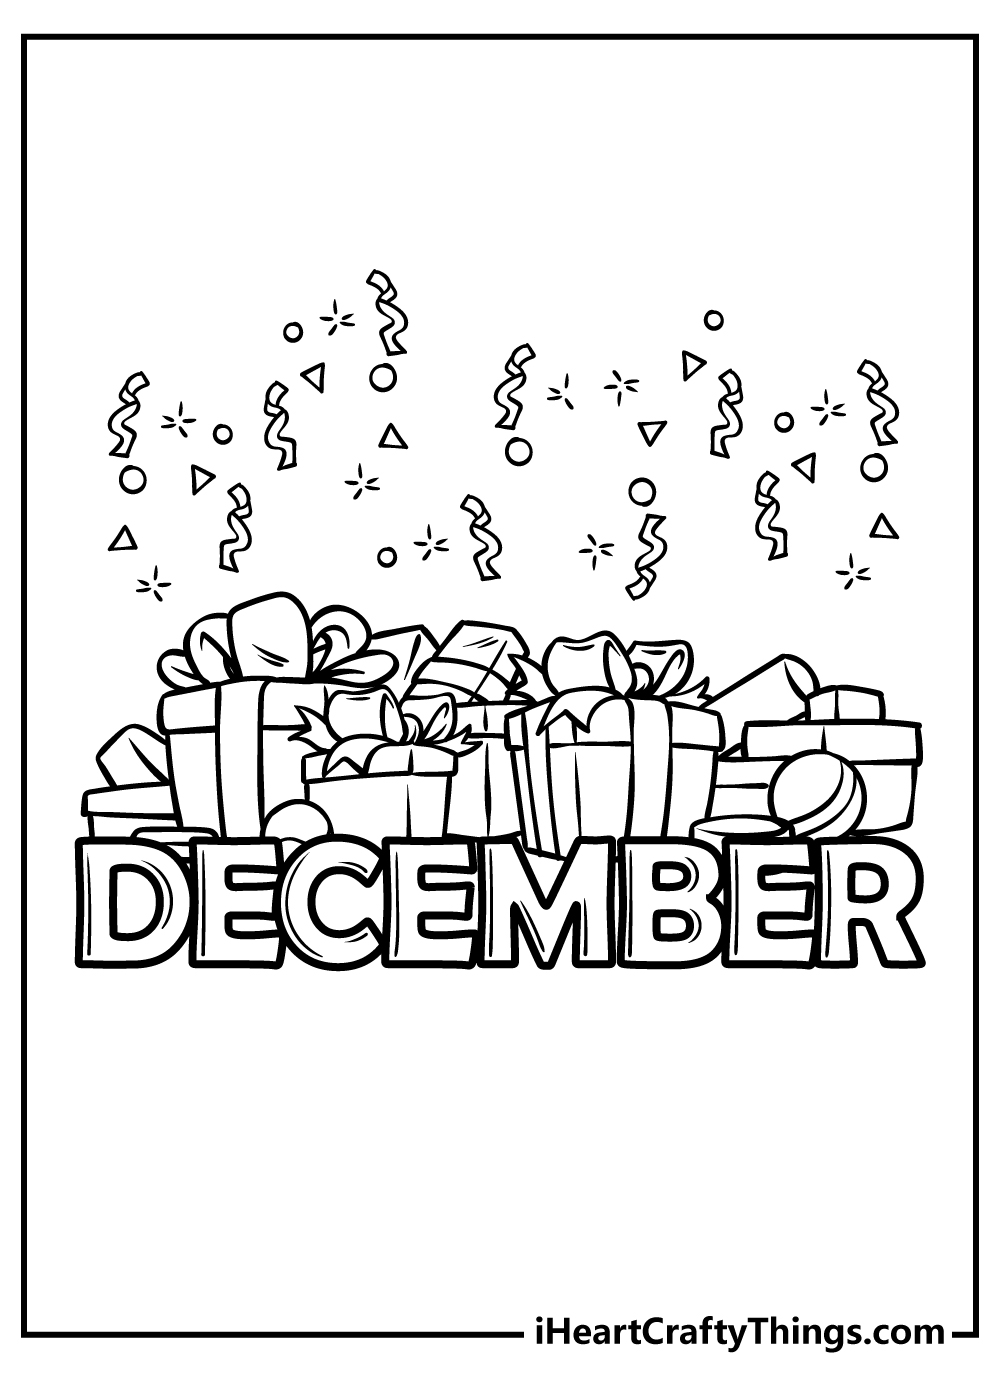 December Coloring Book for adults free download